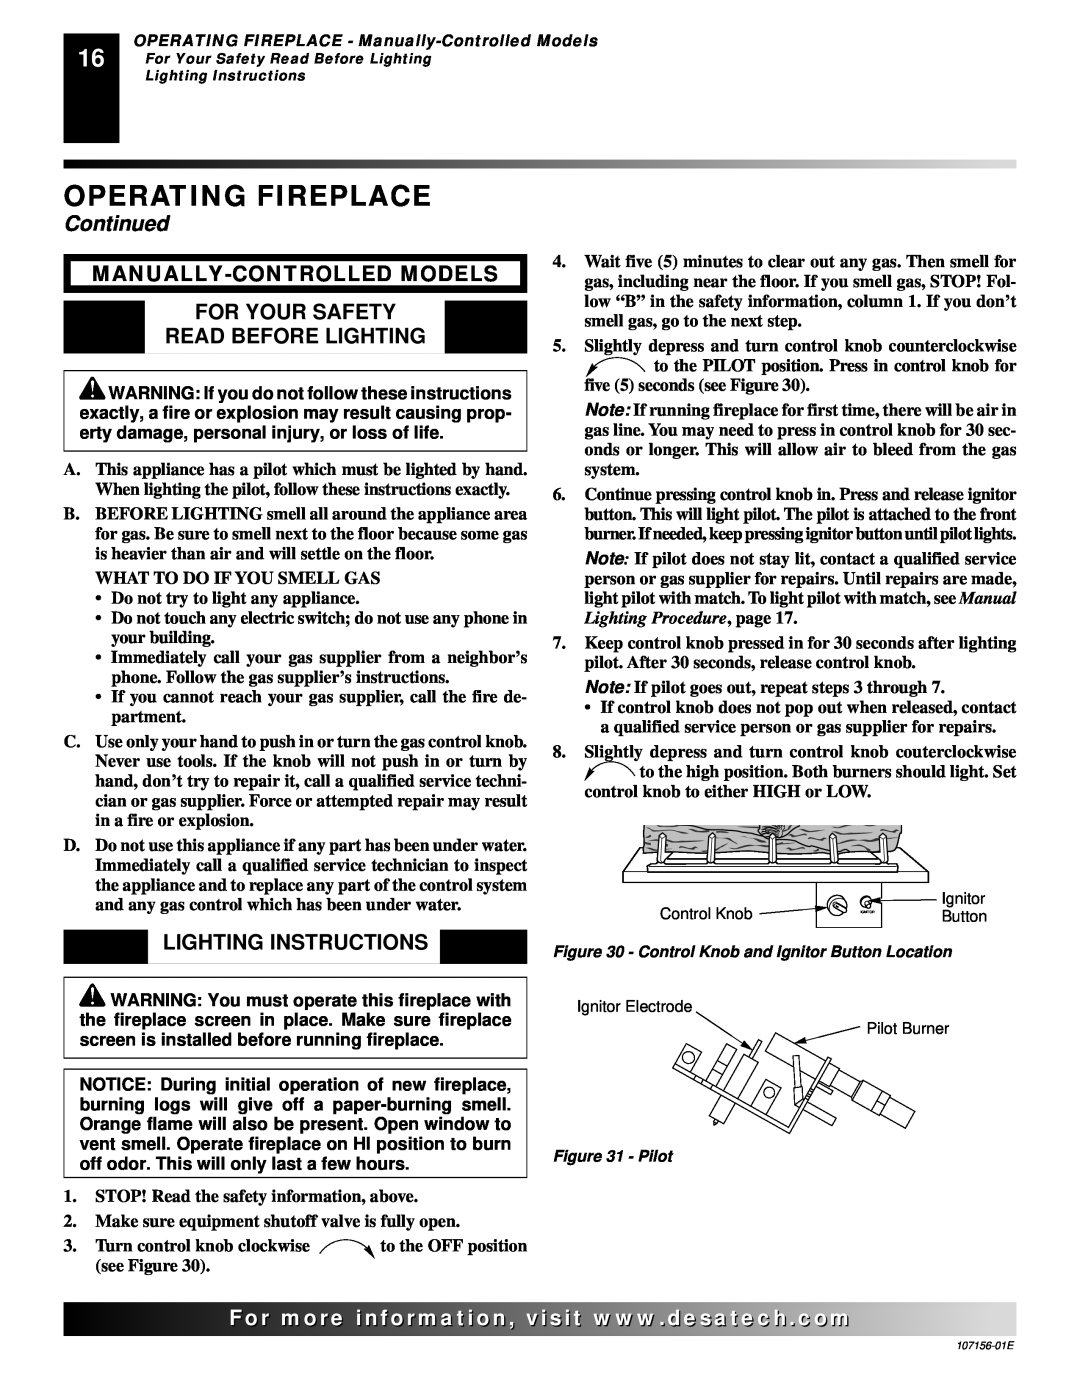 Vanguard Heating 107156-01E.pdf Manually-Controlledmodels For Your Safety, Operating Fireplace, Continued 